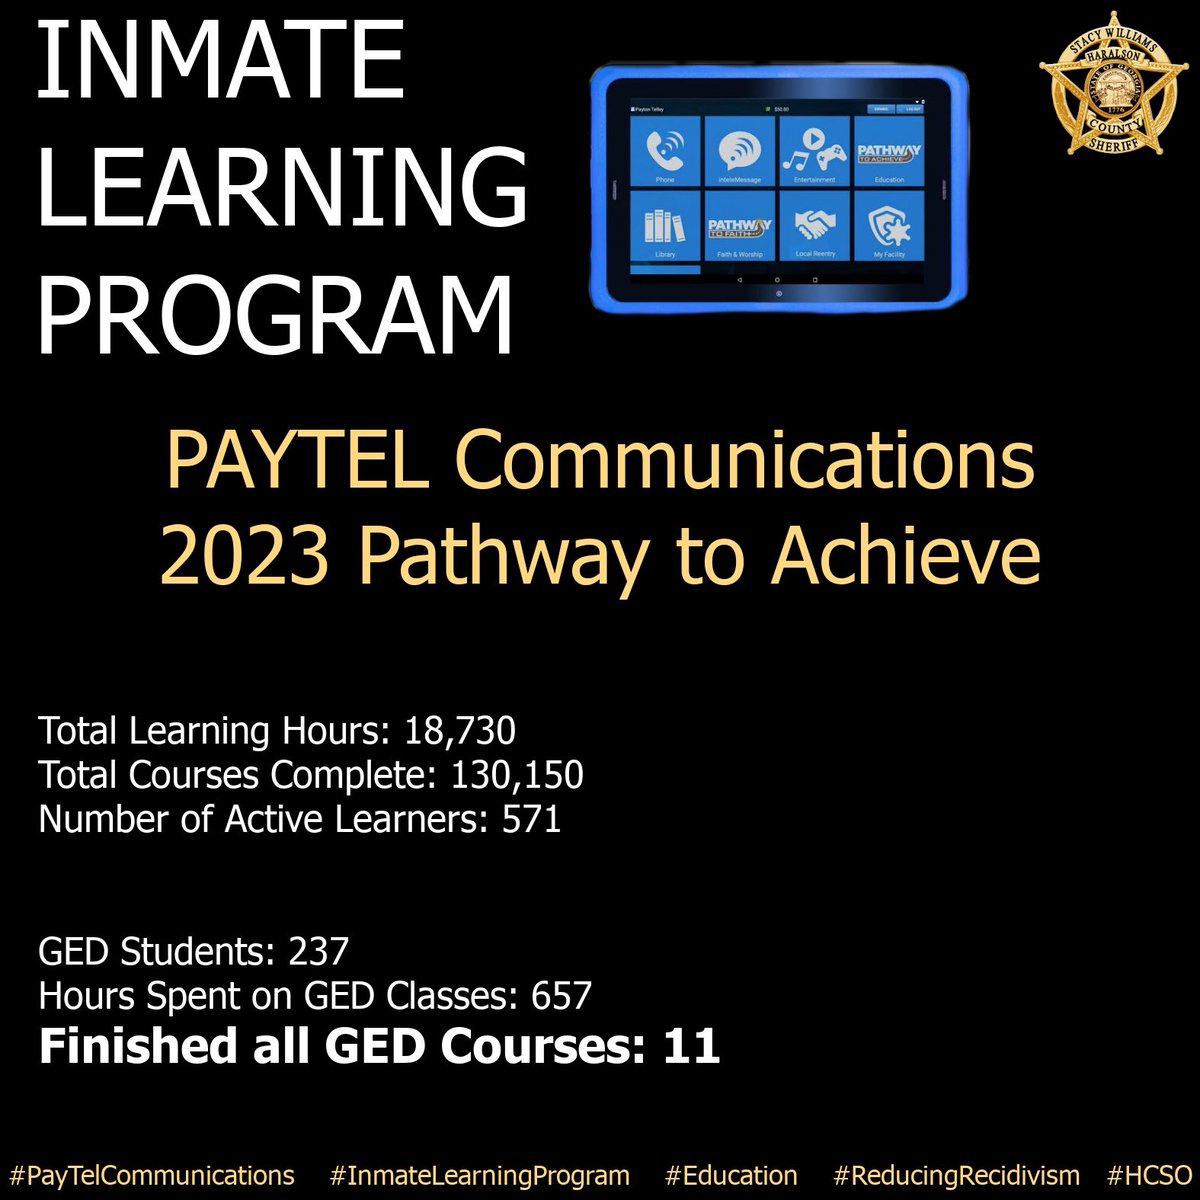 2023 Inmate Learning Program stats GED students: 237 Hours spent on GED classes: 657 Finished all GED courses: 11 These educational opportunities, which could cost over $10,000 per inmate, are provided to our inmates at no cost to our taxpayers. #InmateLearningProgram #HCSO